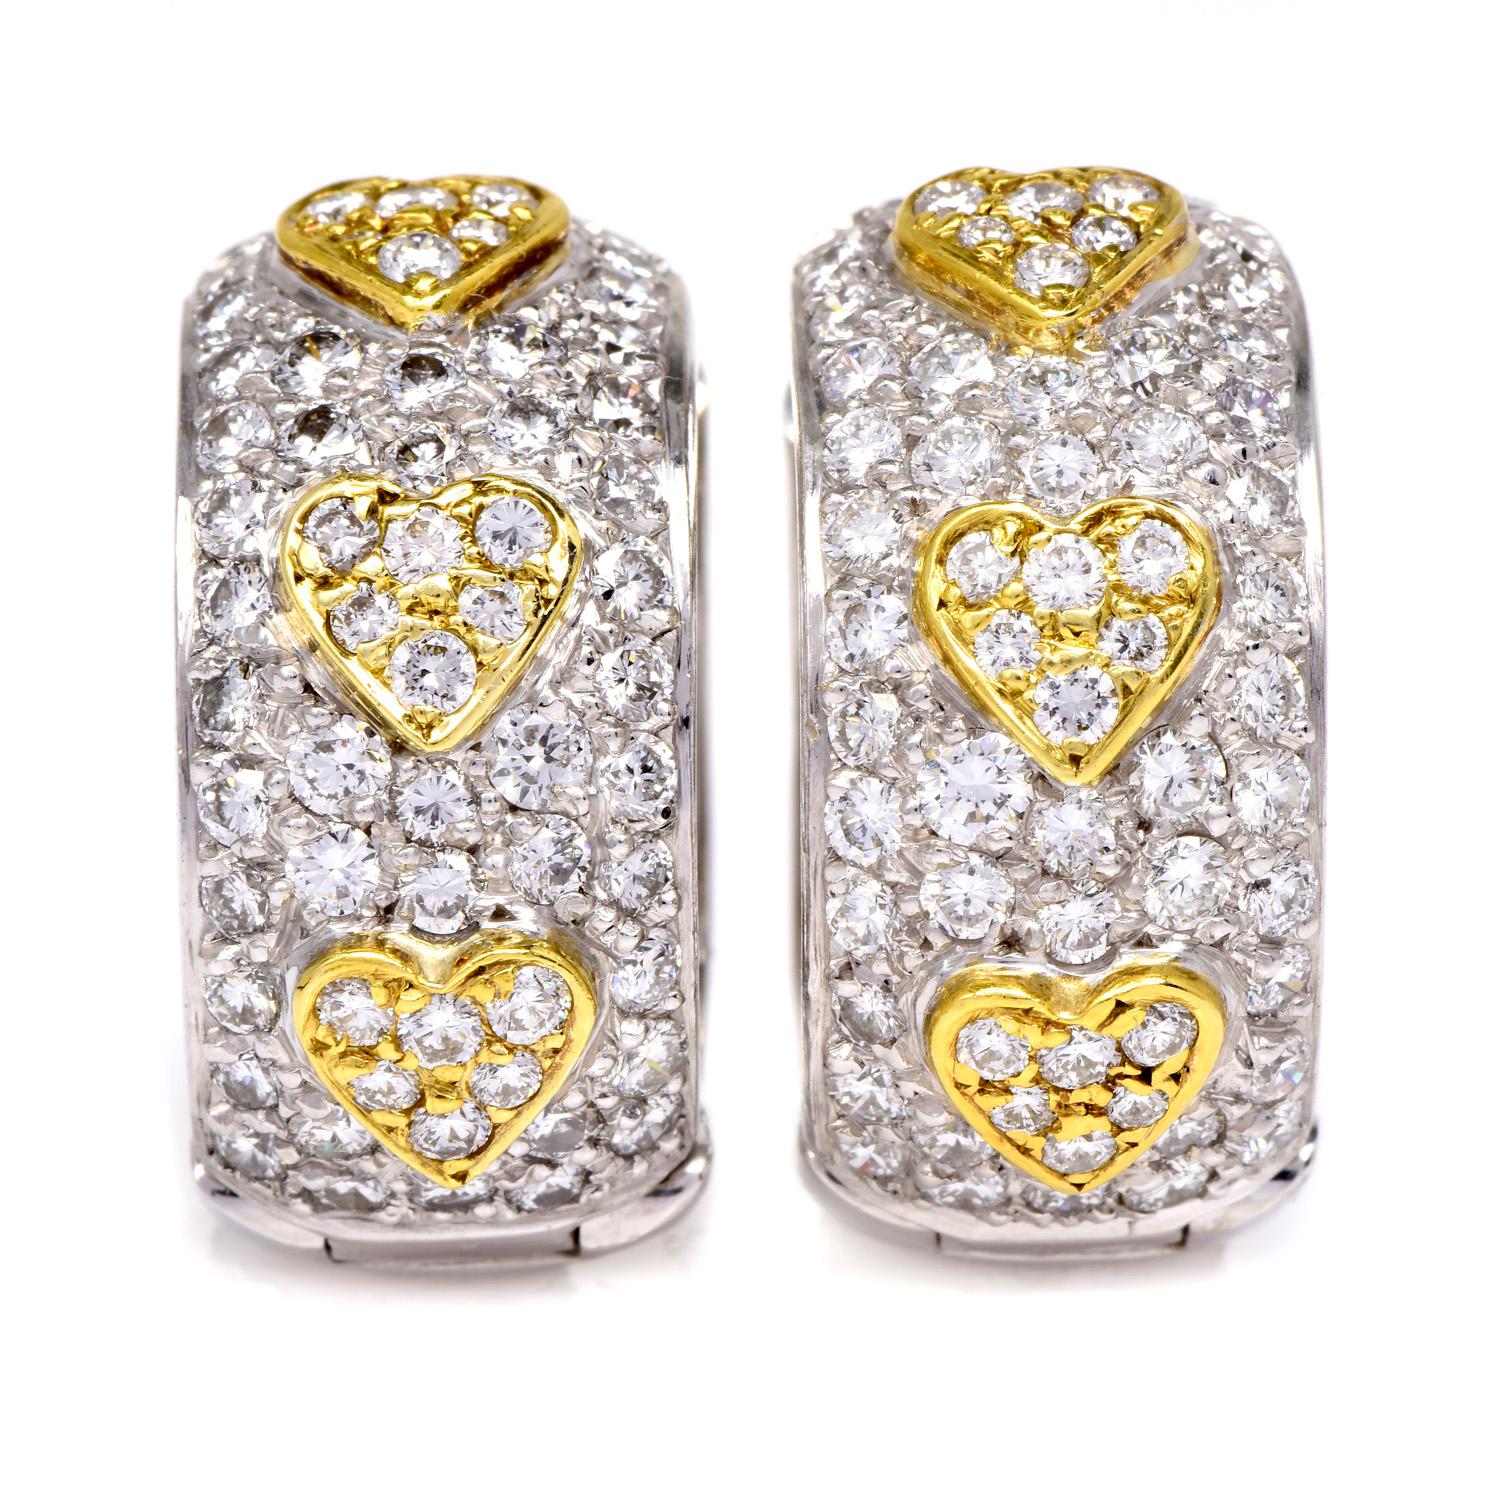 These beautiful Pave Diamond Earrings were inspired in a Hoop with a heart 

motifs and crafted in 18K White Gold and 18k yellow gold.

Over 88 bright white round, brilliant-cut diamonds adorn these earrings

weighing approx. 4.11-carat pave-set and